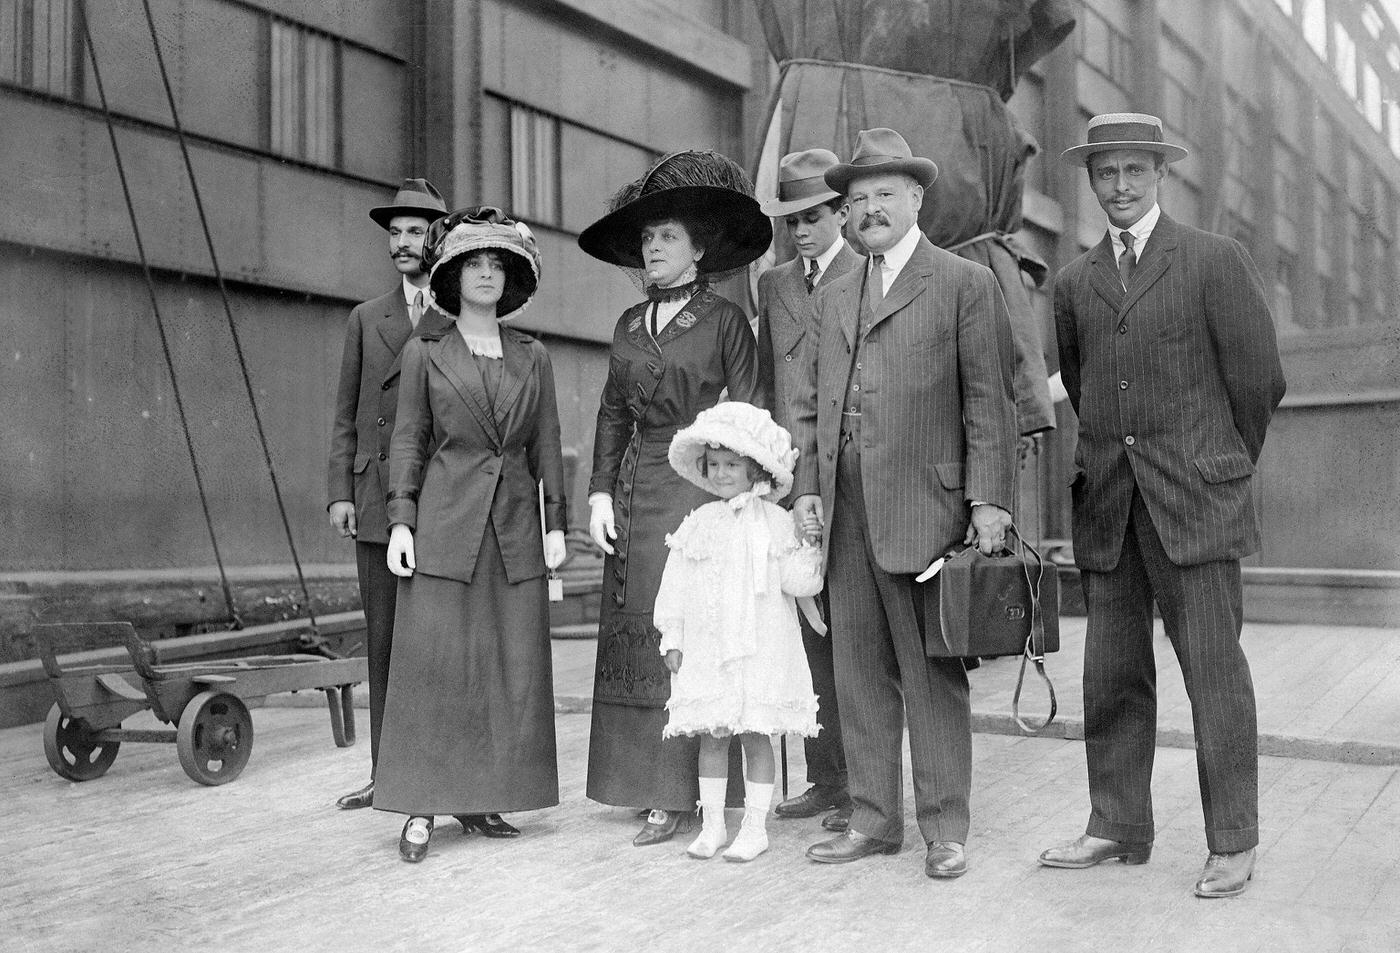 George Jay Gould I, manager, financier, and railroad executive from the USA, arriving in Hamburg, Germany with his family, 1912